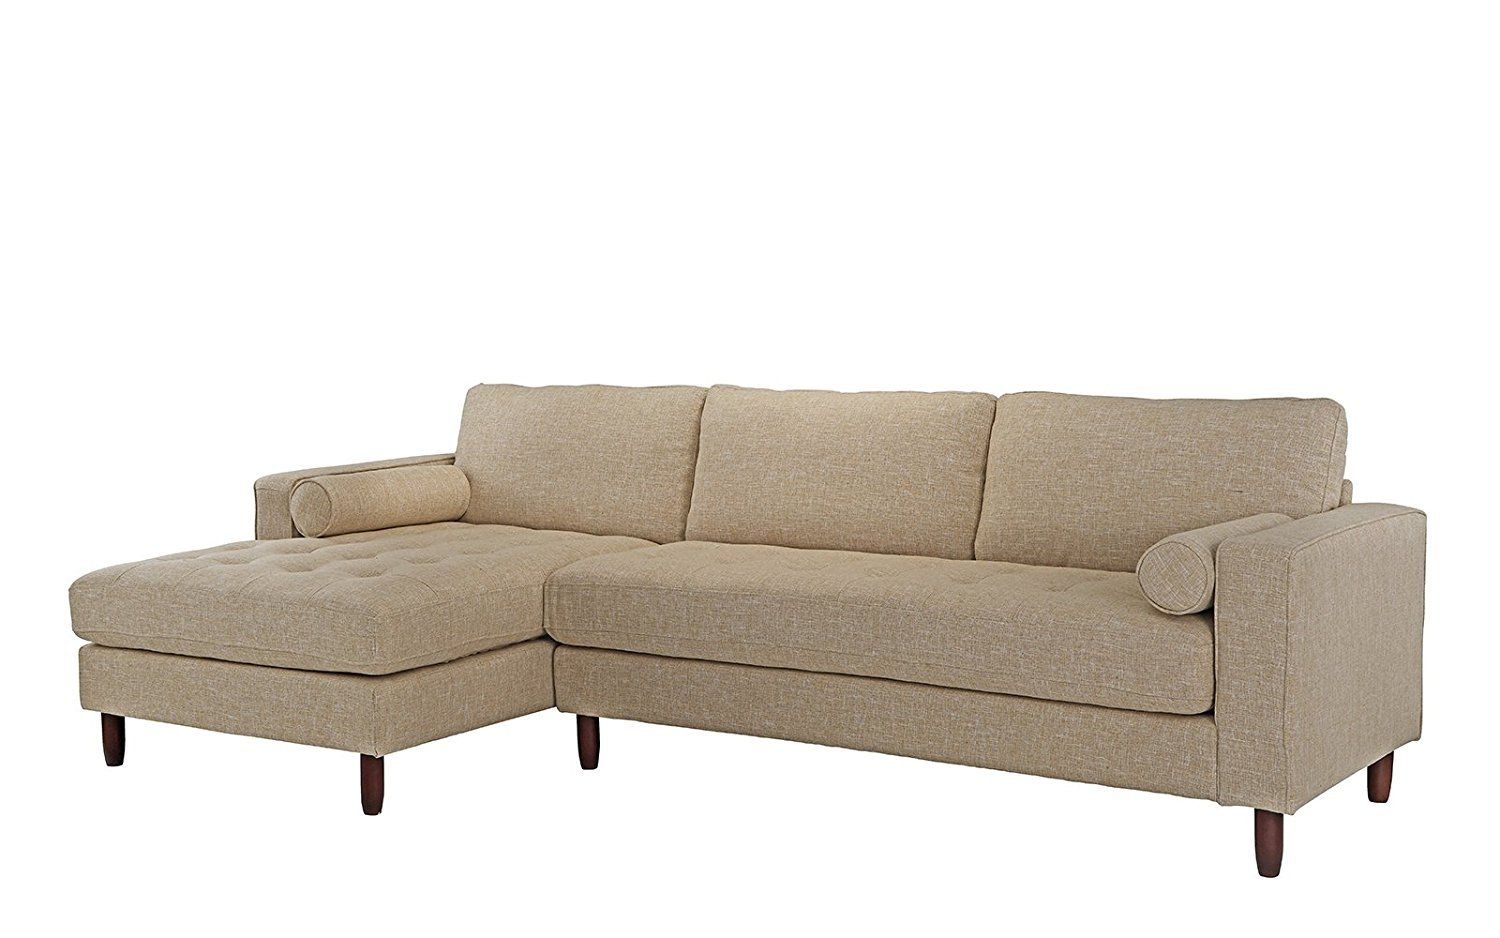 Mid Century Modern Tufted Fabric Sectional Sofa, L Shape Couch Beige Throughout Small L Shaped Sectional Sofas In Beige (View 10 of 21)